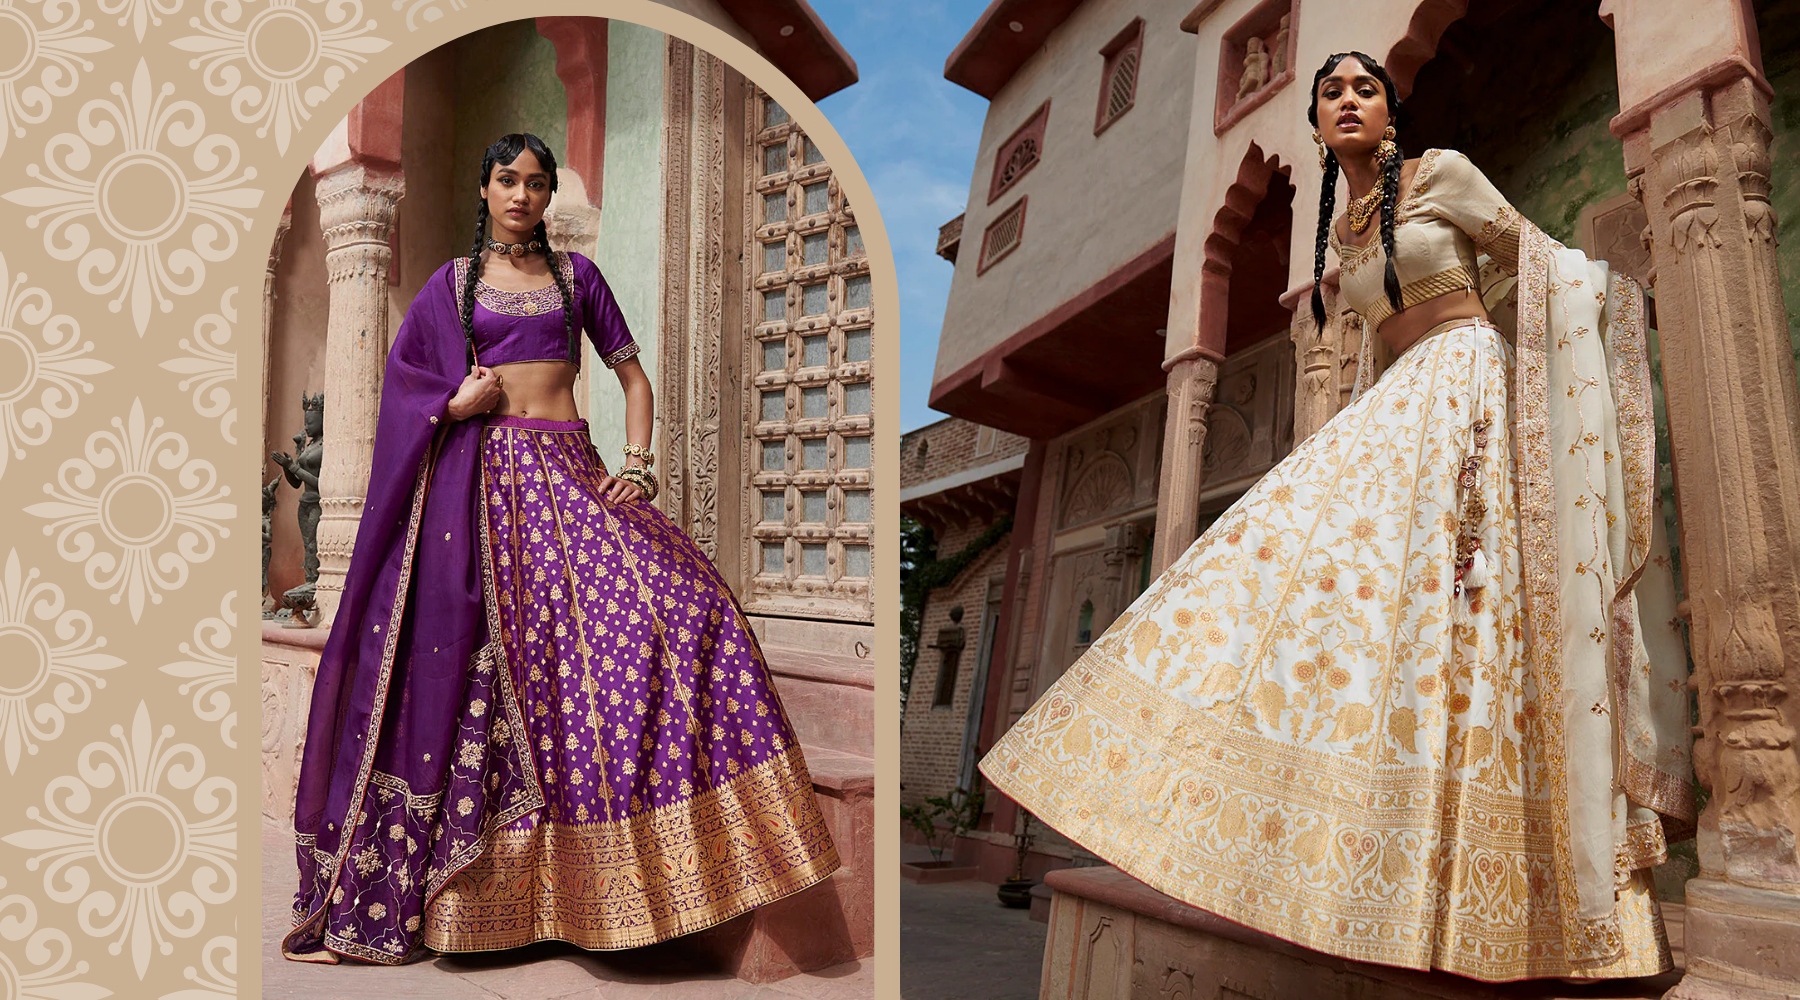 Garment Making - 3 Types of Lehengas You Can Design at Home